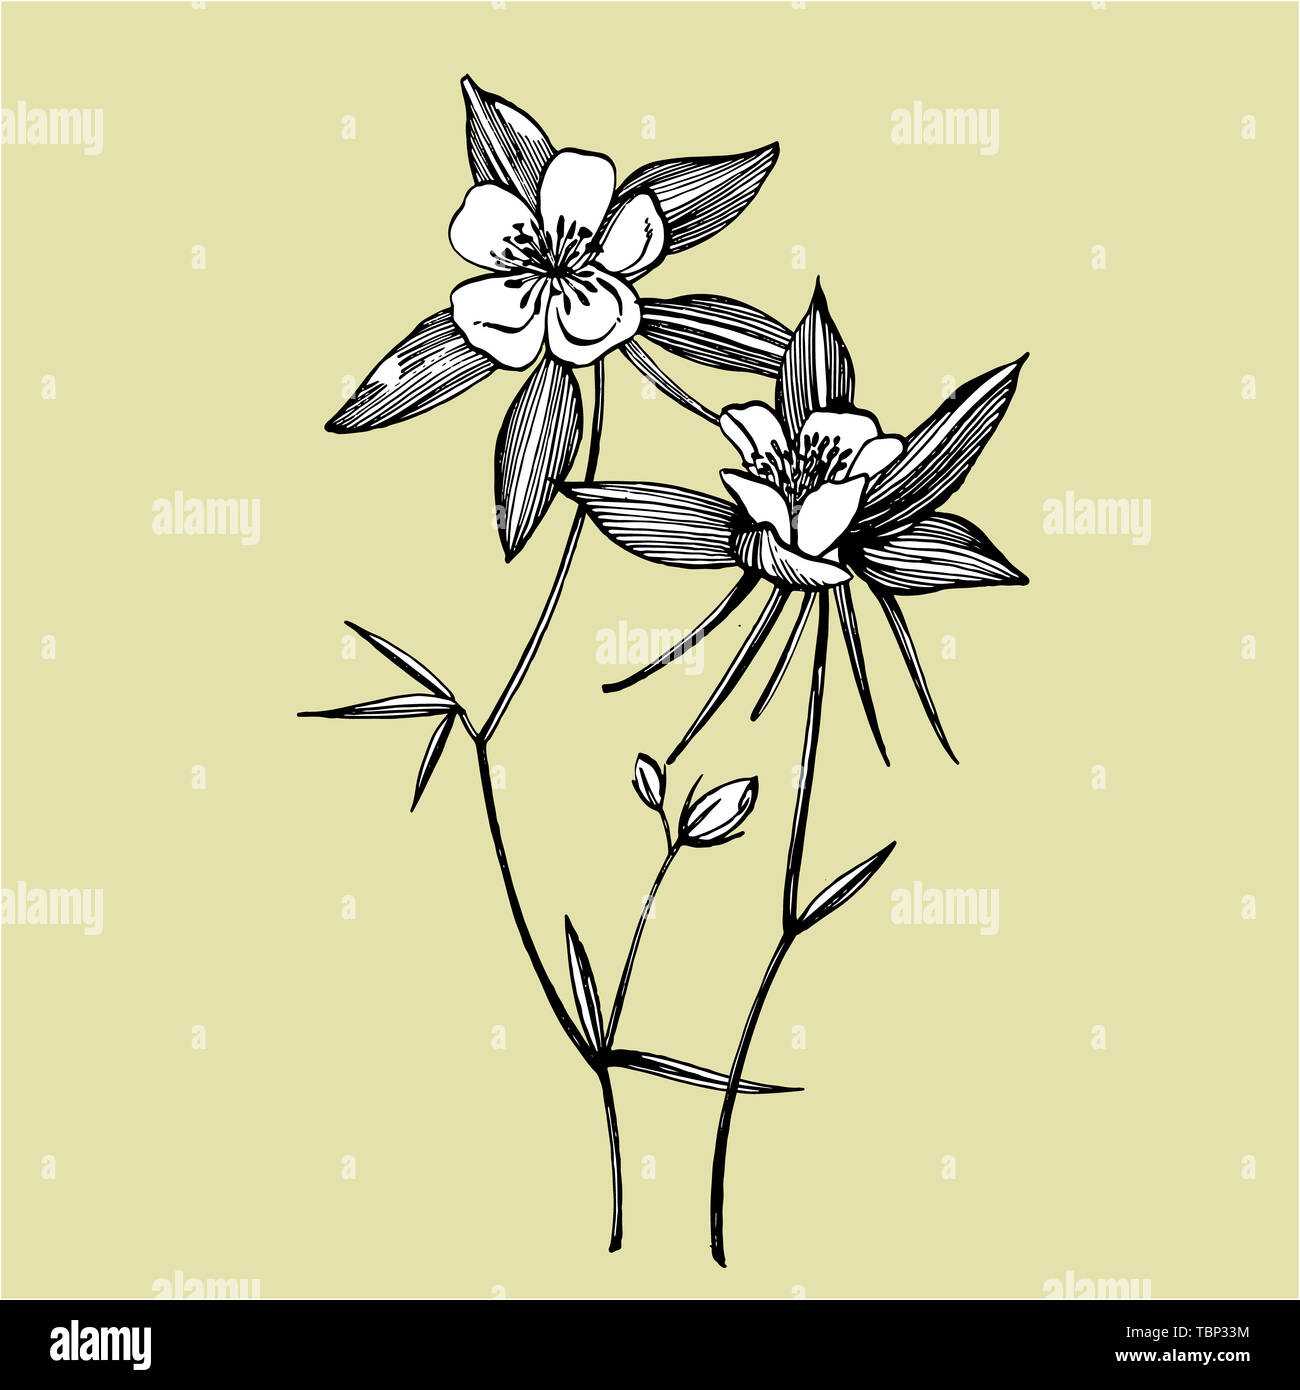 Double Columbine flowers. Collection of hand drawn flowers and plants. Botany. Set. Vintage flowers. Black and white illustration in the style of Stock Photo